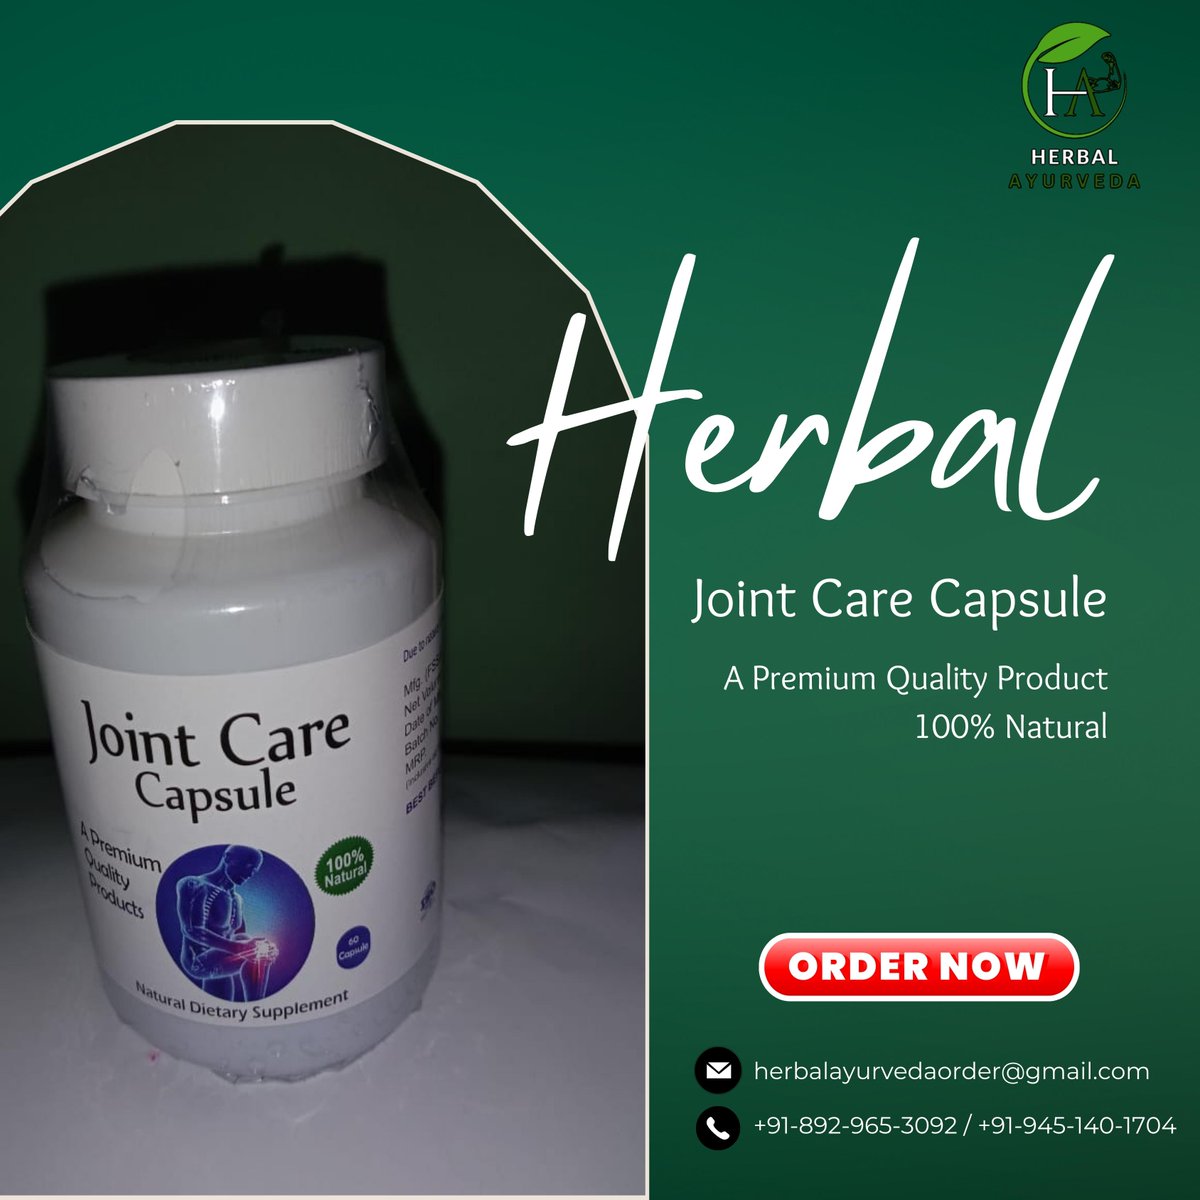 Our products will definitely help you to reduce your joint pain.

Buy it and Try it.

#herbalayurveda #herbal #ayurveda #naturalproduct #jointcarecapsul #100percentnatural #jointcare #JointHealth #JointSupport #HealthyJoints #JointWellness #NaturalJointCare #JointStrength